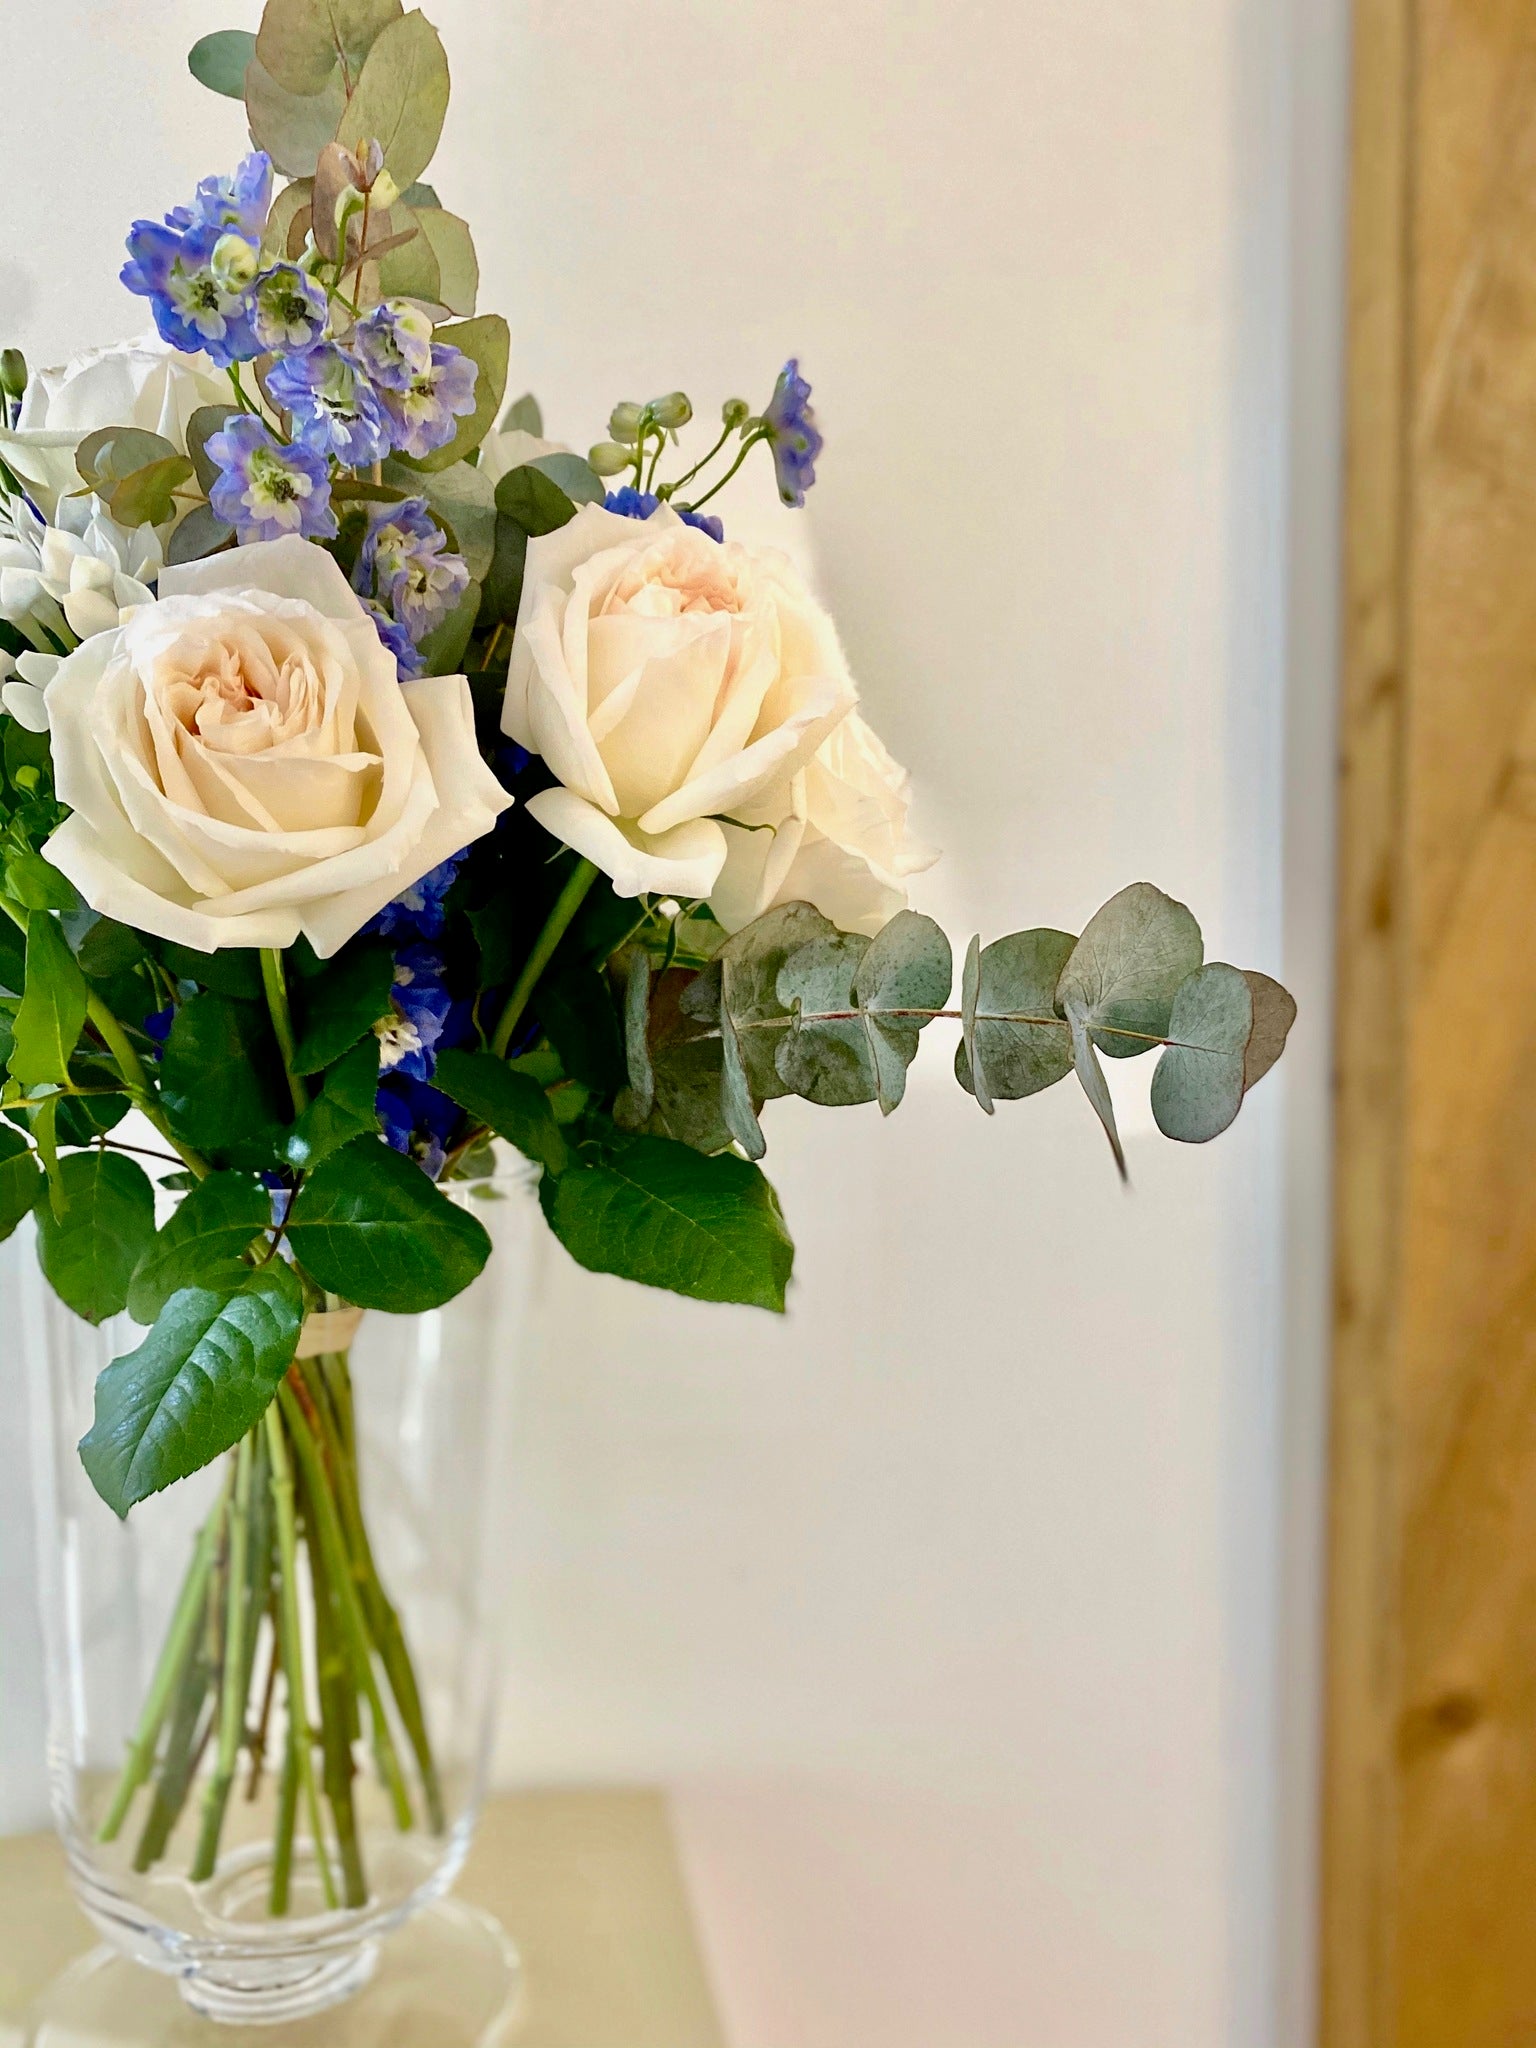 Aimee bouquet by Margot Floral Design. A fresh flower bouquet composed of White O'Hara Garden Roses, Blue Delphiniums, White Bouvardias, and Eucalyptus. Small size.